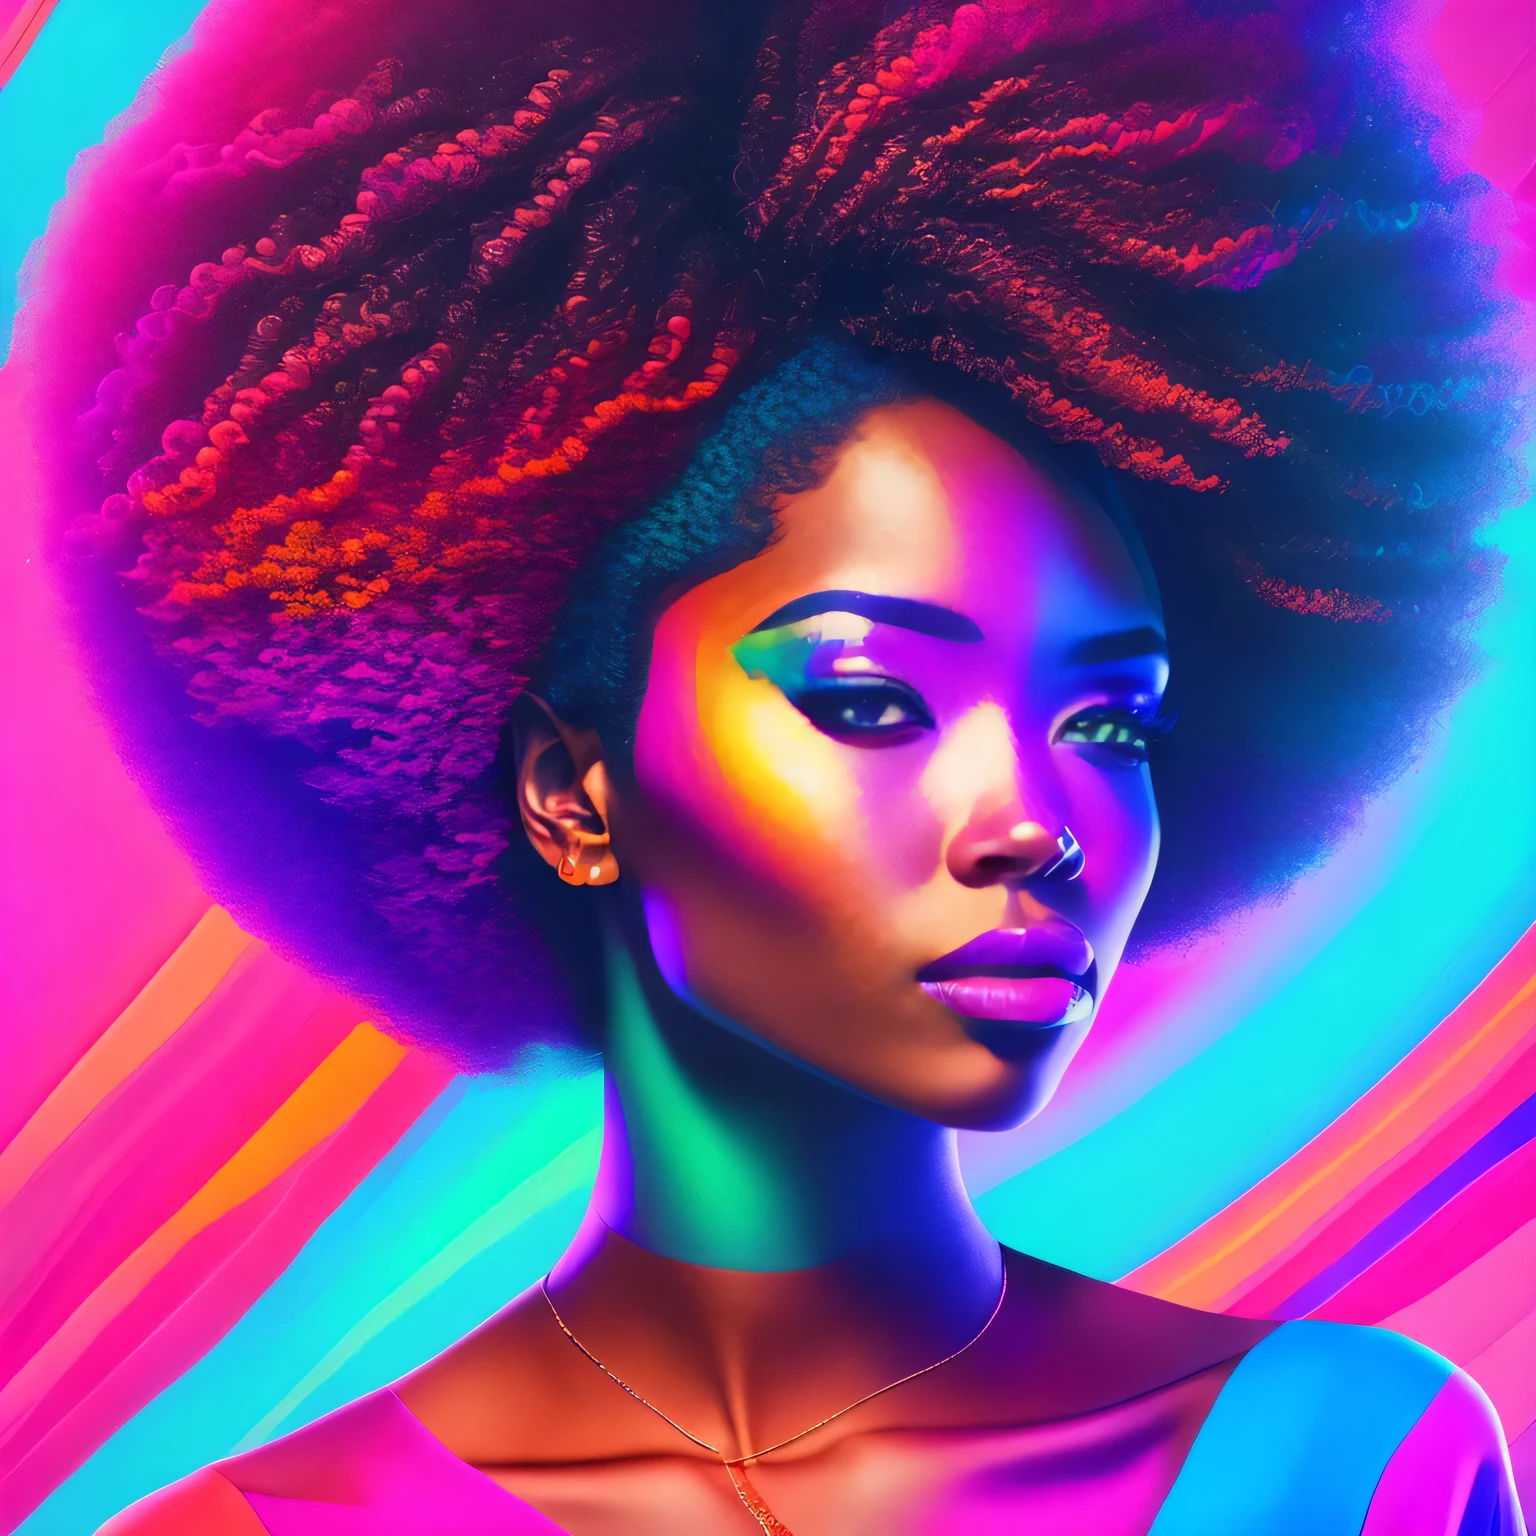 a woman with afro colored mookano hair and earrings, high colored texture, portrait color glamour, detailed color portrait, neon color bleed, high-quality portrait, colorized portrait, ultraviolet and neon colors, color studio portrait, full-colour illustration, vibrant colors hyper realism, vibrant neon colors, pop and vibrant colors, cor neon, colorful fashion, cyberpunk style color, iridescent illustration